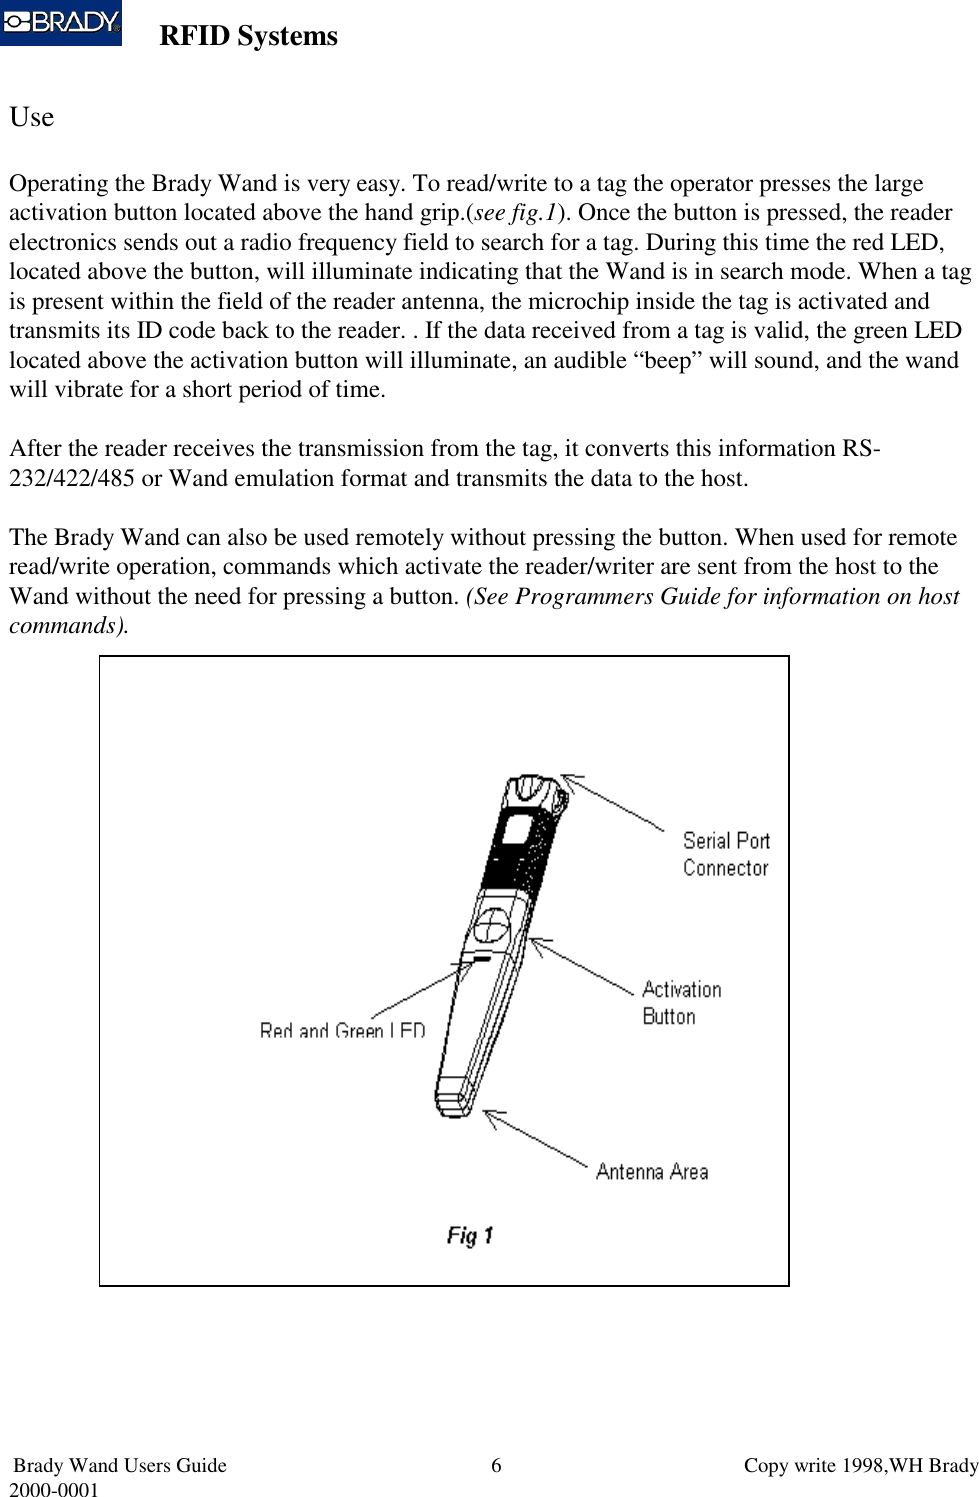 RFID SystemsBrady Wand Users Guide                           Copy write 1998,WH Brady2000-0001 6UseOperating the Brady Wand is very easy. To read/write to a tag the operator presses the largeactivation button located above the hand grip.(see fig.1). Once the button is pressed, the readerelectronics sends out a radio frequency field to search for a tag. During this time the red LED,located above the button, will illuminate indicating that the Wand is in search mode. When a tagis present within the field of the reader antenna, the microchip inside the tag is activated andtransmits its ID code back to the reader. . If the data received from a tag is valid, the green LEDlocated above the activation button will illuminate, an audible “beep” will sound, and the wandwill vibrate for a short period of time.After the reader receives the transmission from the tag, it converts this information RS-232/422/485 or Wand emulation format and transmits the data to the host.The Brady Wand can also be used remotely without pressing the button. When used for remoteread/write operation, commands which activate the reader/writer are sent from the host to theWand without the need for pressing a button. (See Programmers Guide for information on hostcommands).